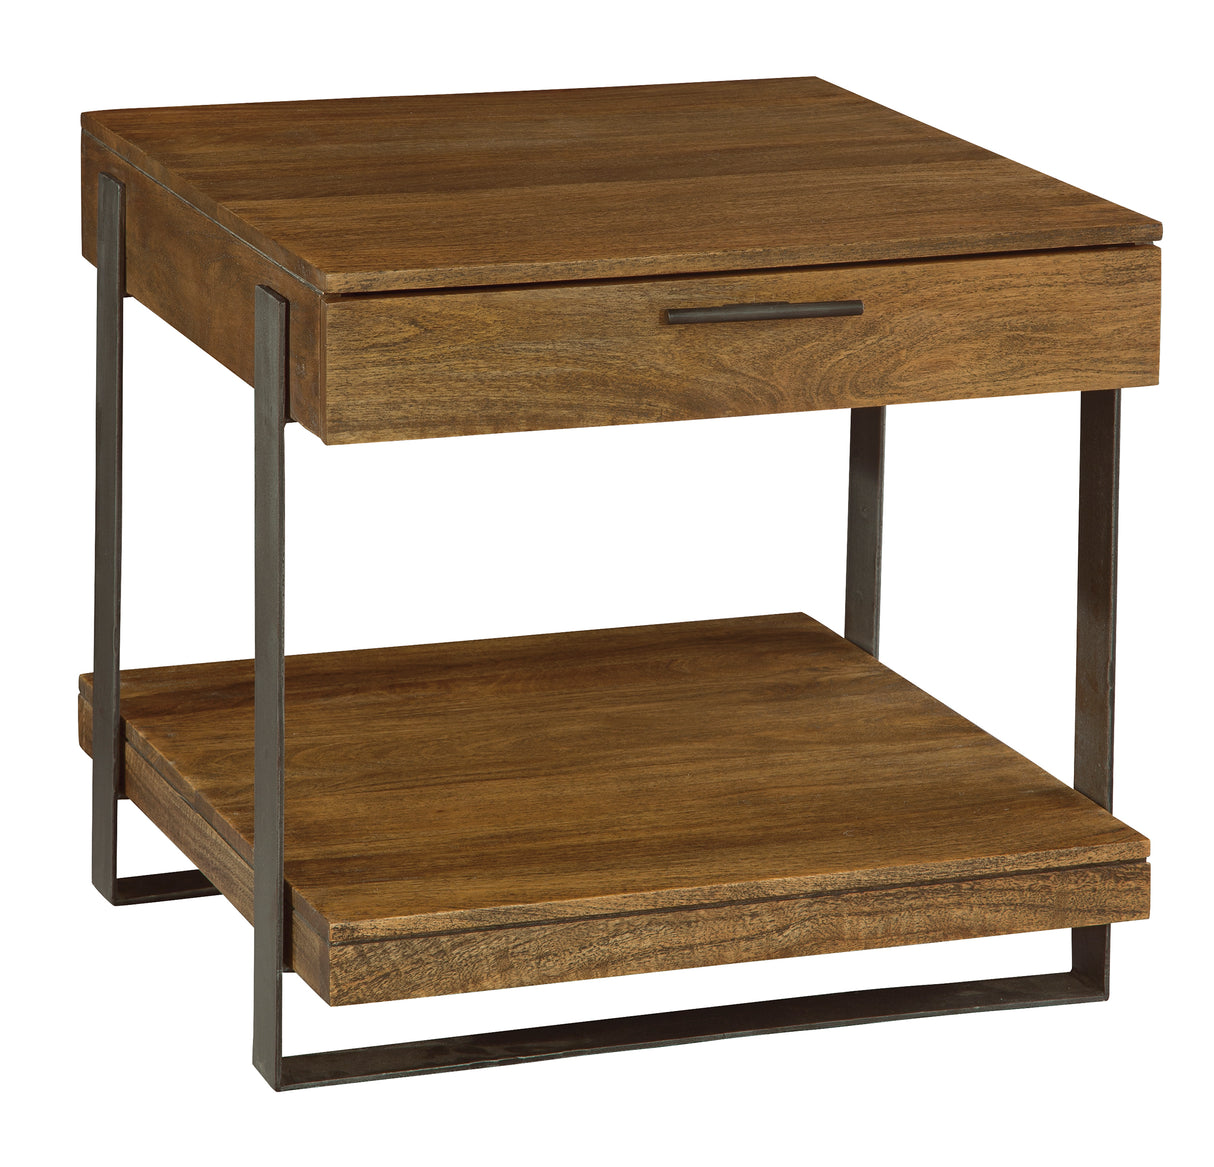 Hekman 23705 Bedford Park 26in. x 28in. x 26in. End Table